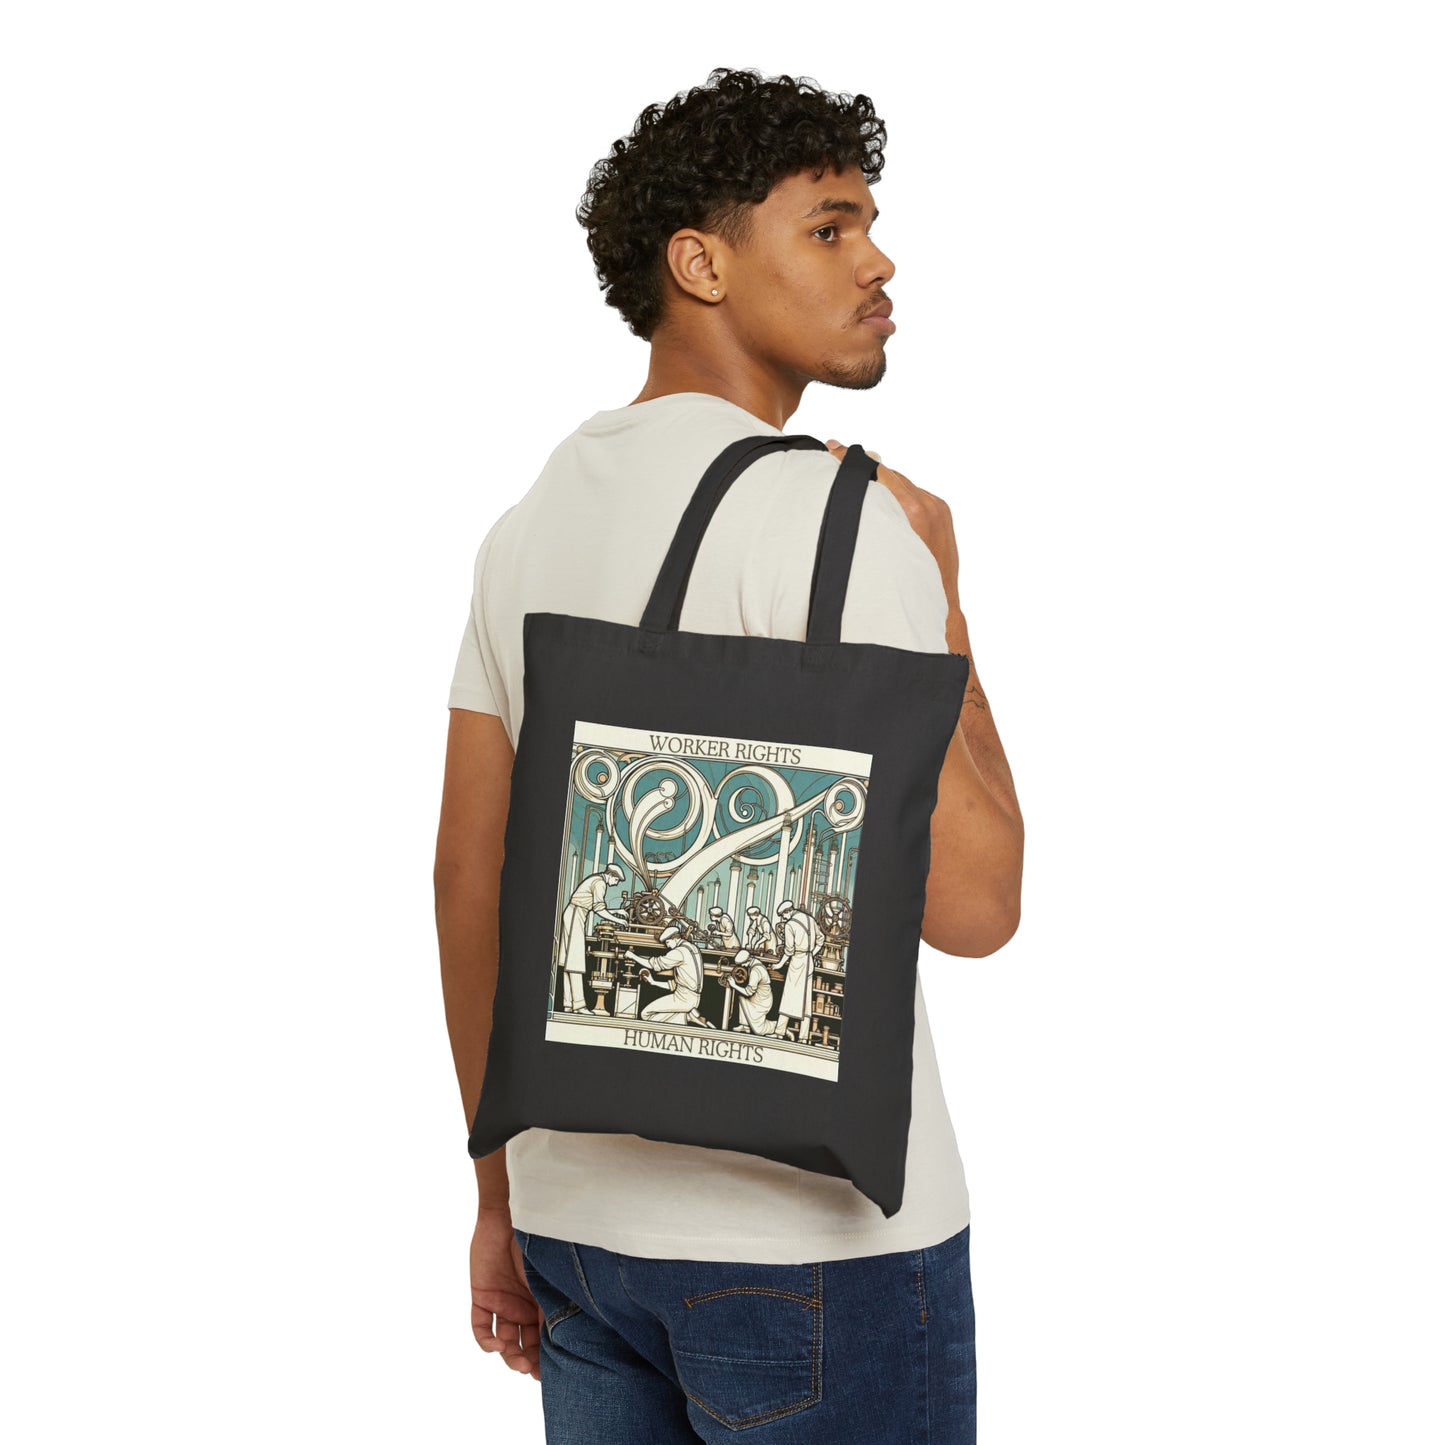 Worker Rights Human Rights (Canvas Tote Bag)